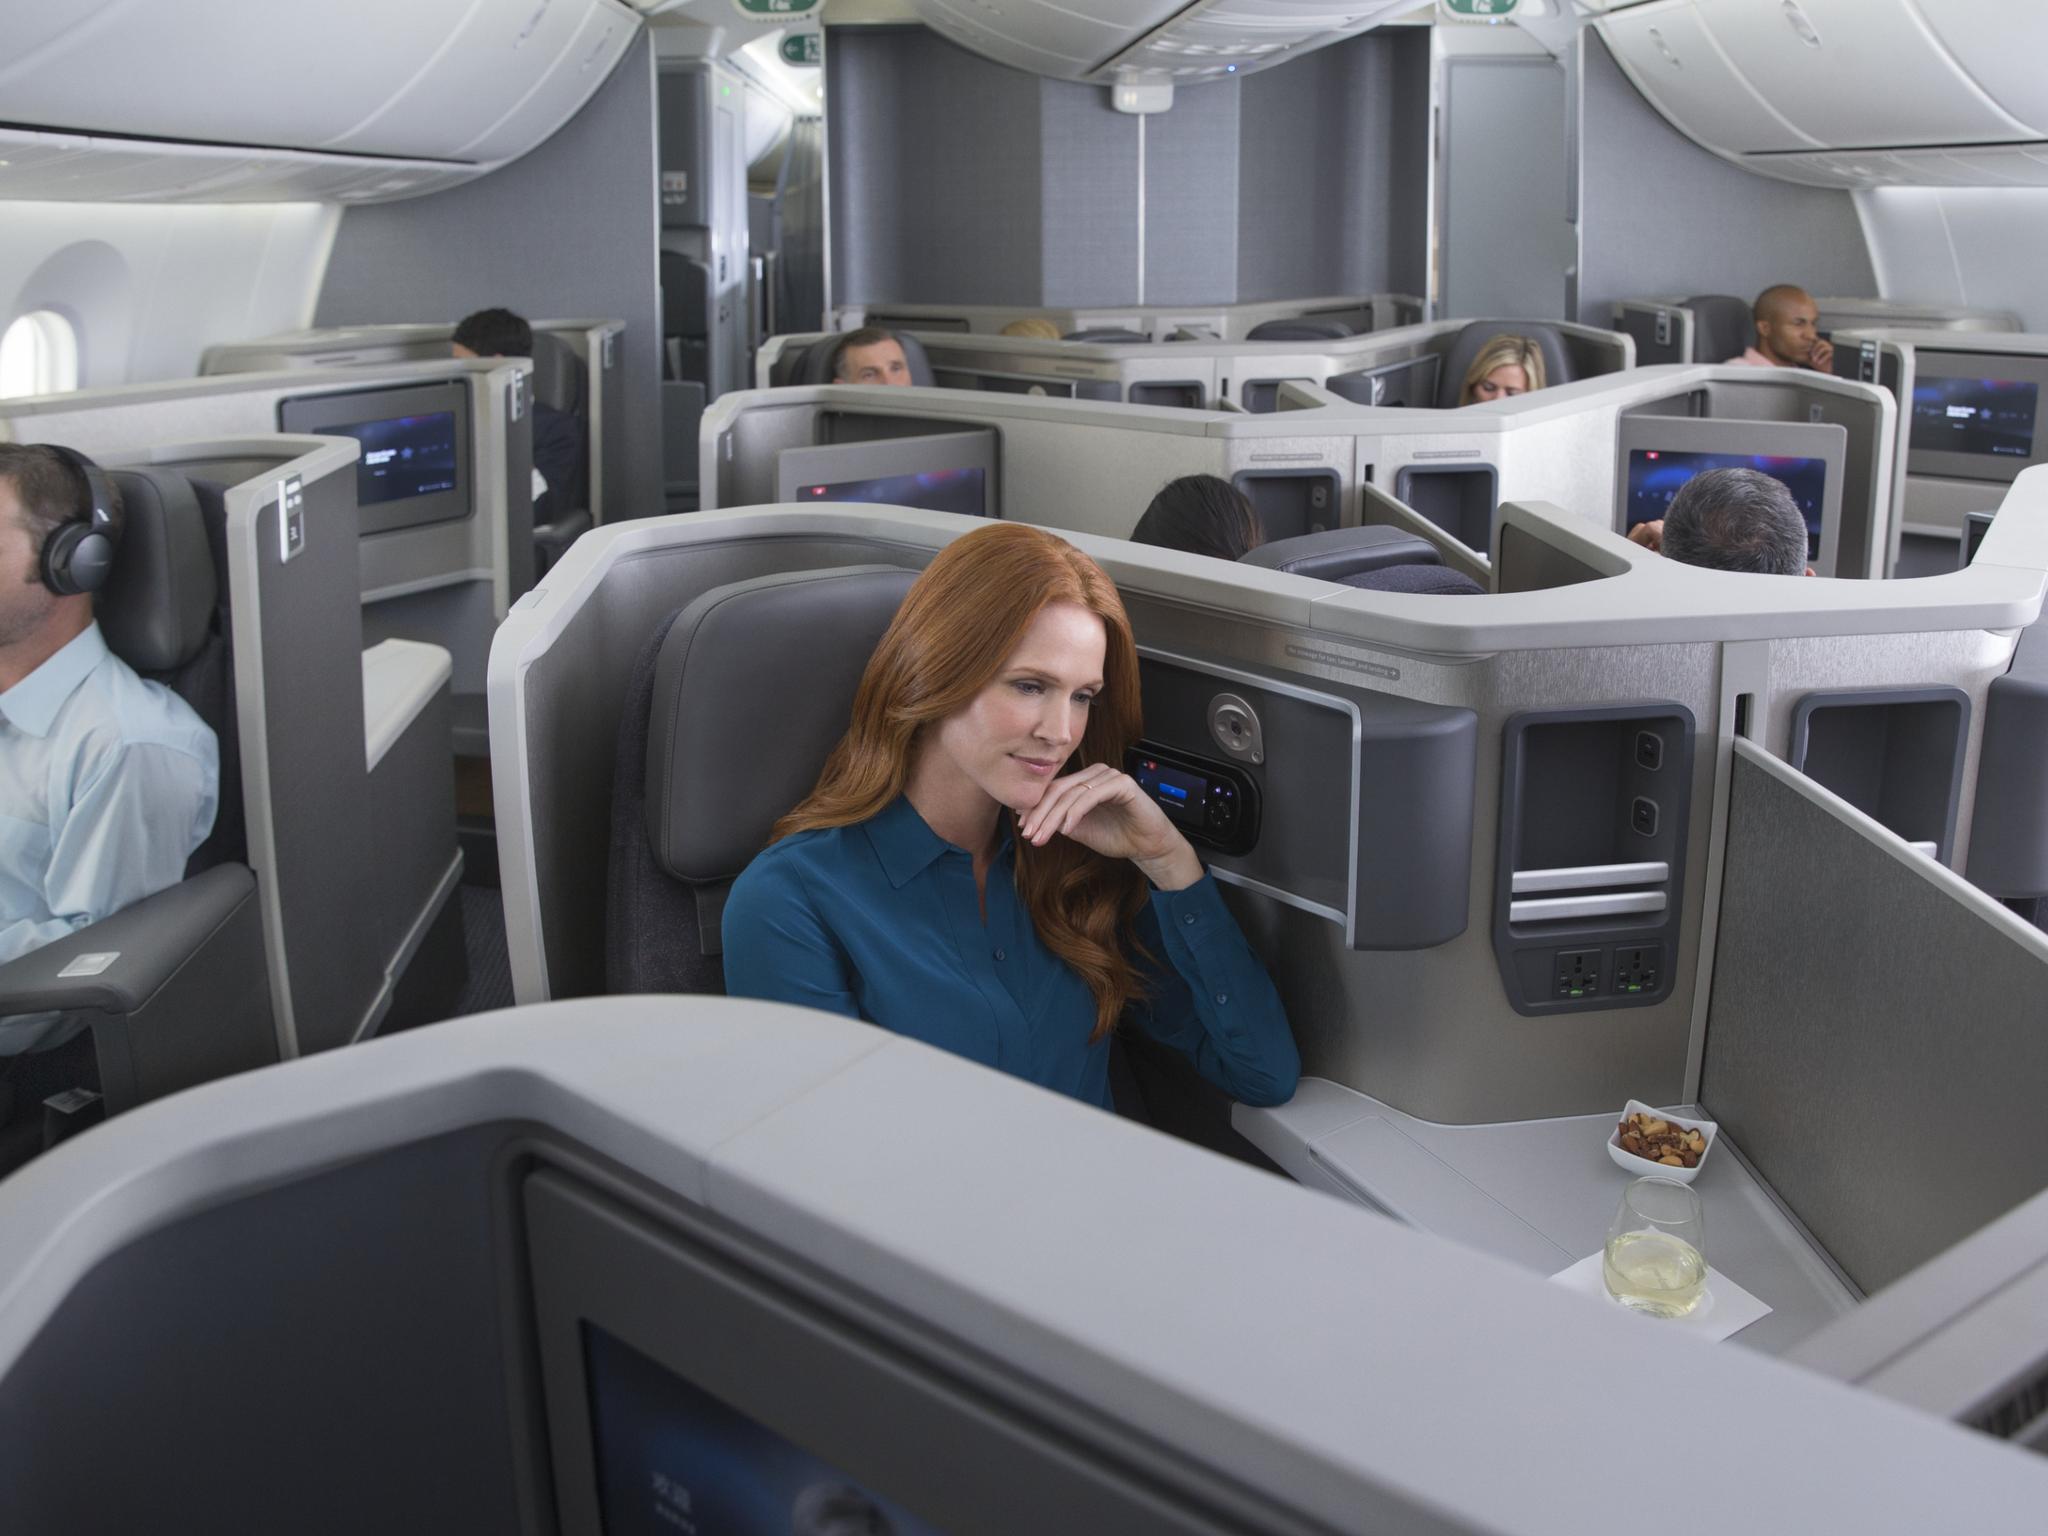 Flight review: American Airlines flagship business class